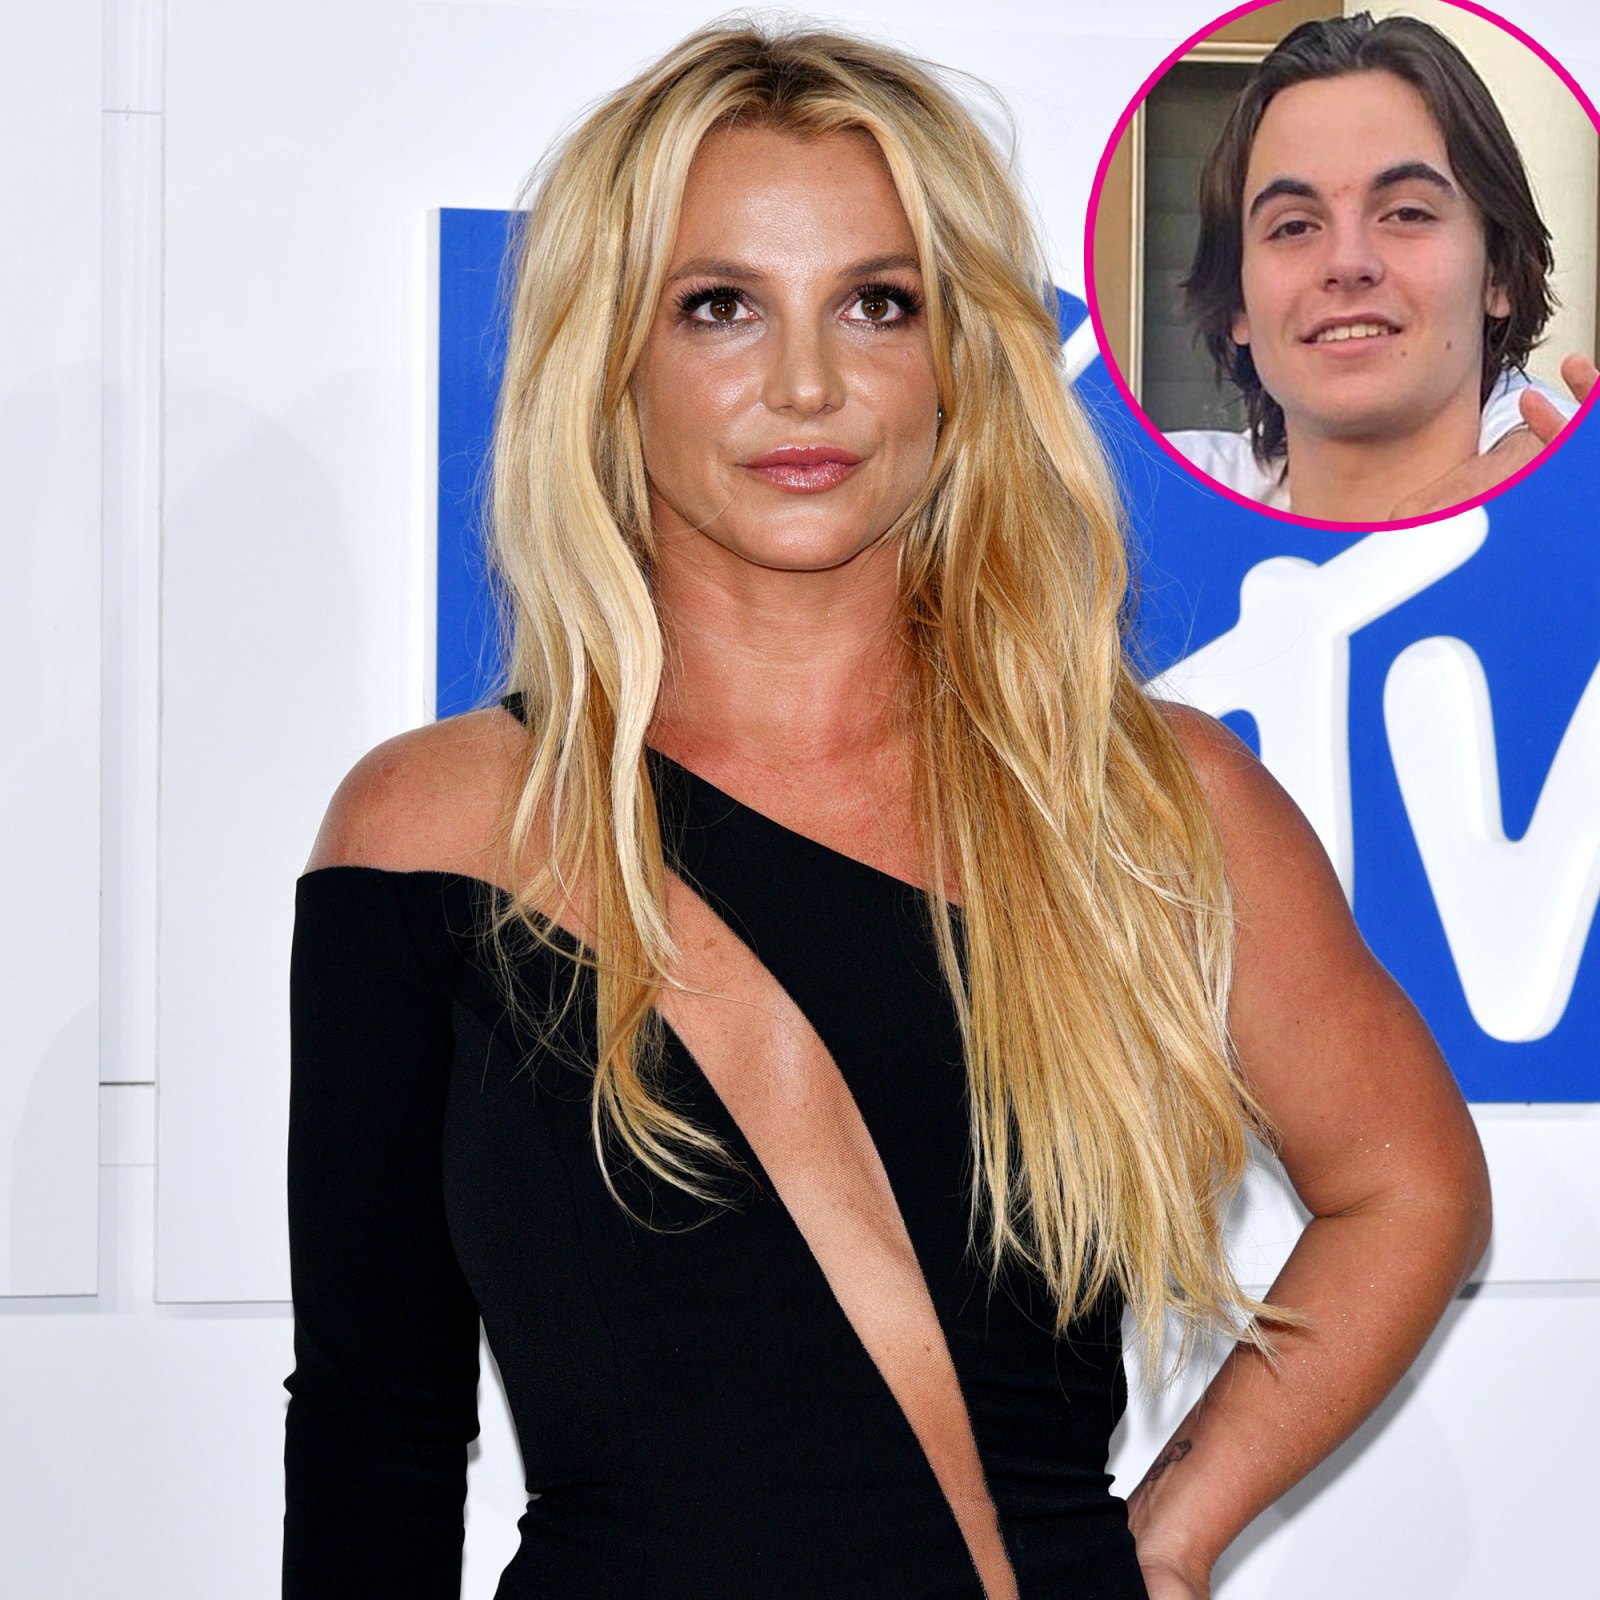 Britney Spears Reacts to Son Jayden’s Claims She ‘Struggled’ as a Parent